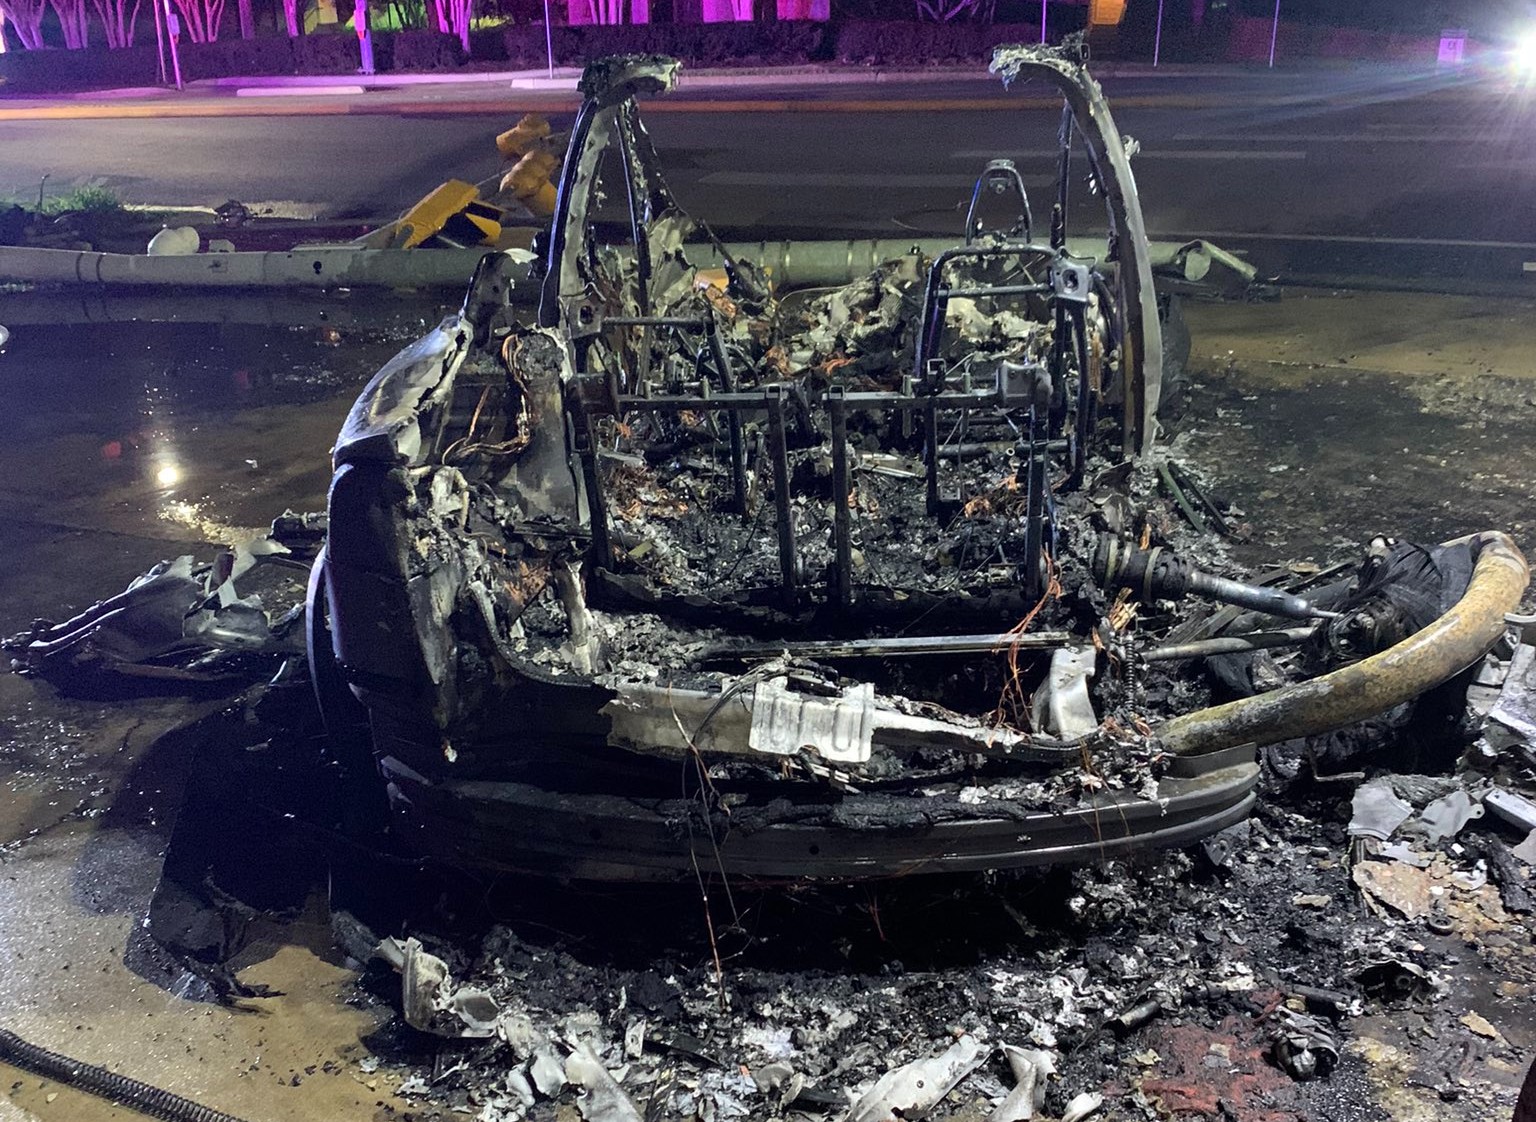 Tesla Model X involved in fiery Texas crash: What we know so far